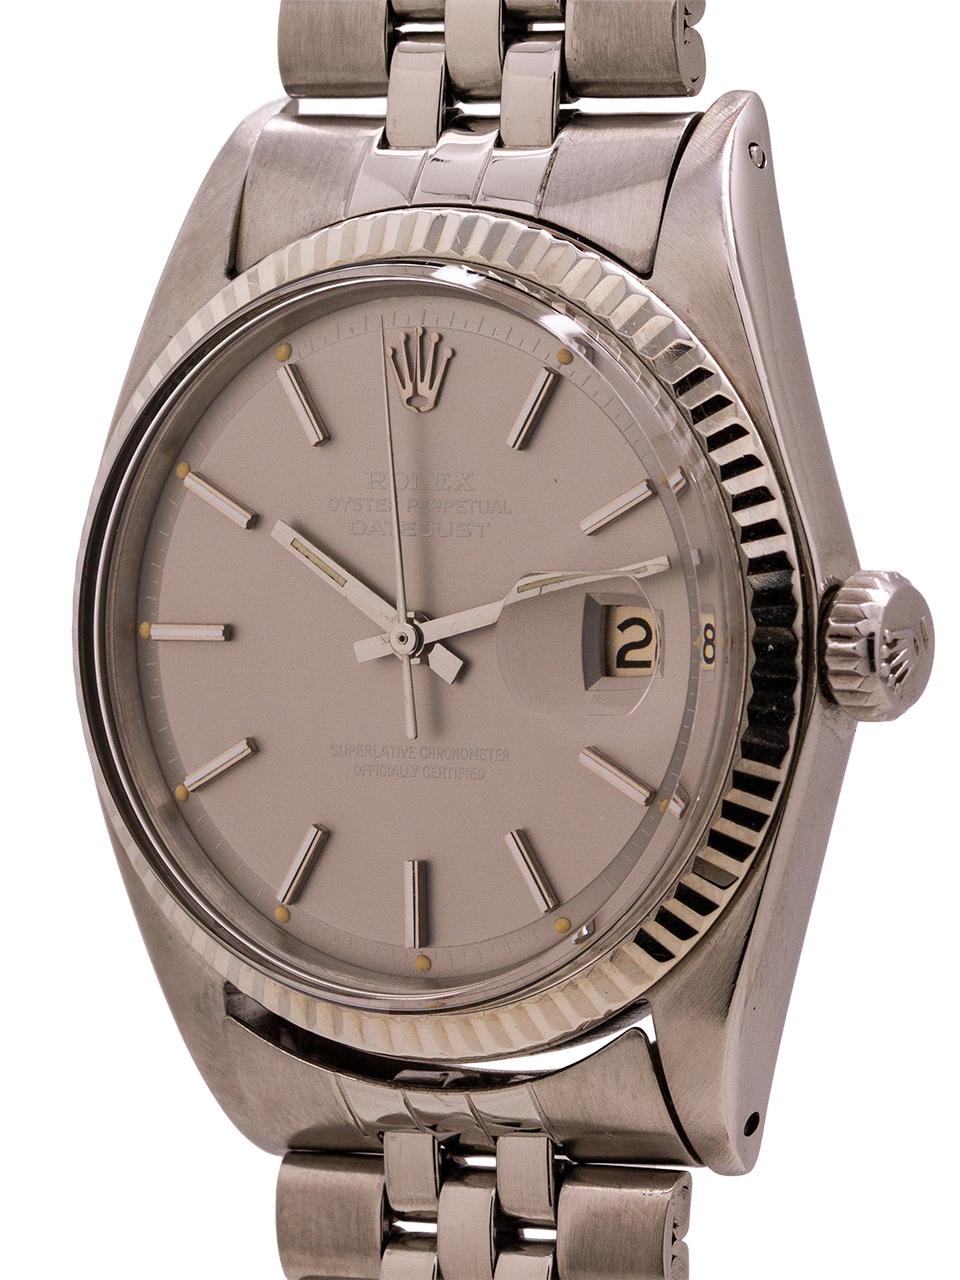 Rolex Datejust Ref 1601 Stainless Steel and 14 Karat Gray Pie Pan Dial In Excellent Condition For Sale In West Hollywood, CA